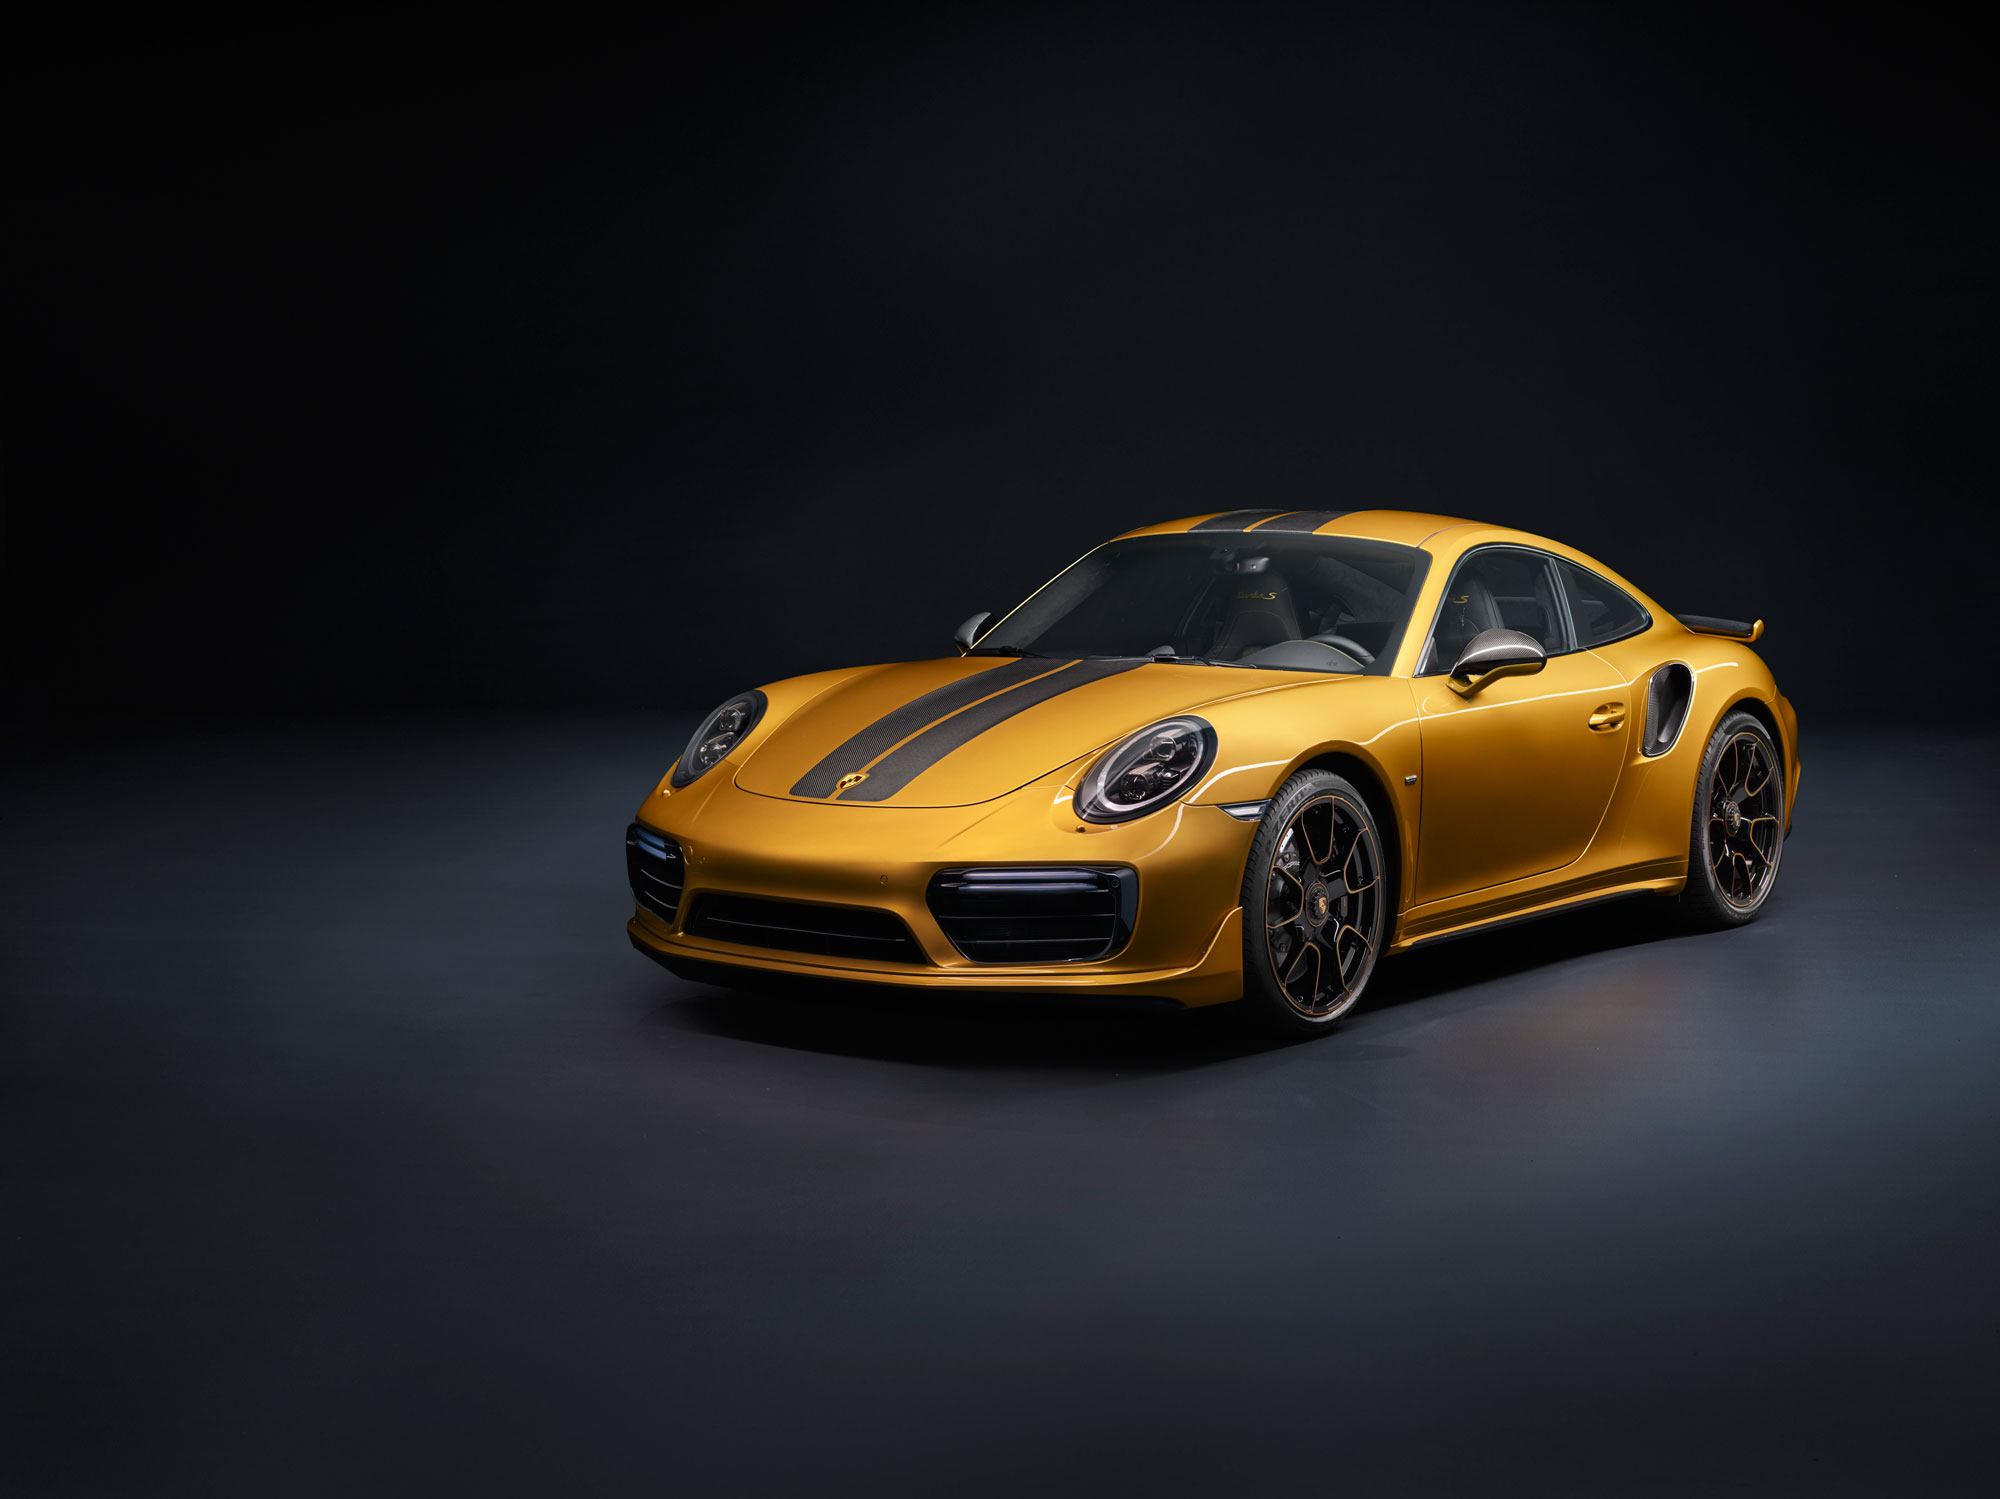 New Porsche 911 Turbo S Exclusive Series More Power And